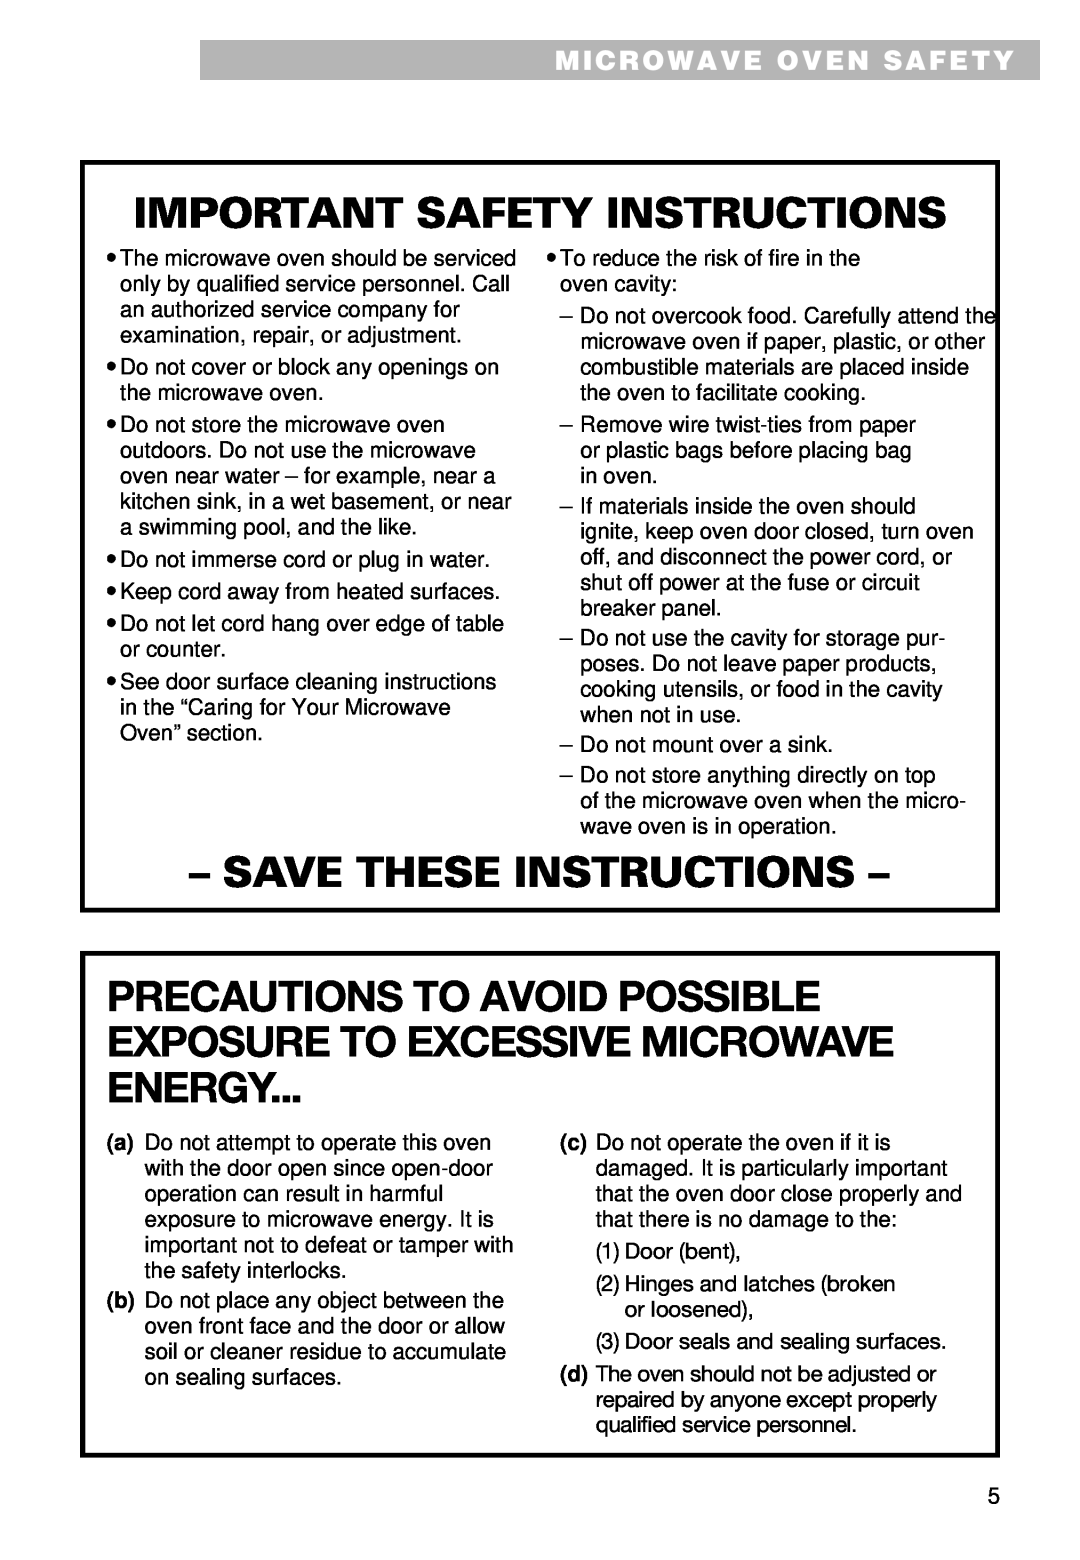 Whirlpool MT9100SF, YMT9101SF, YMT9090SF Important Safety Instructions, Save These Instructions, Microwave Oven Safety 